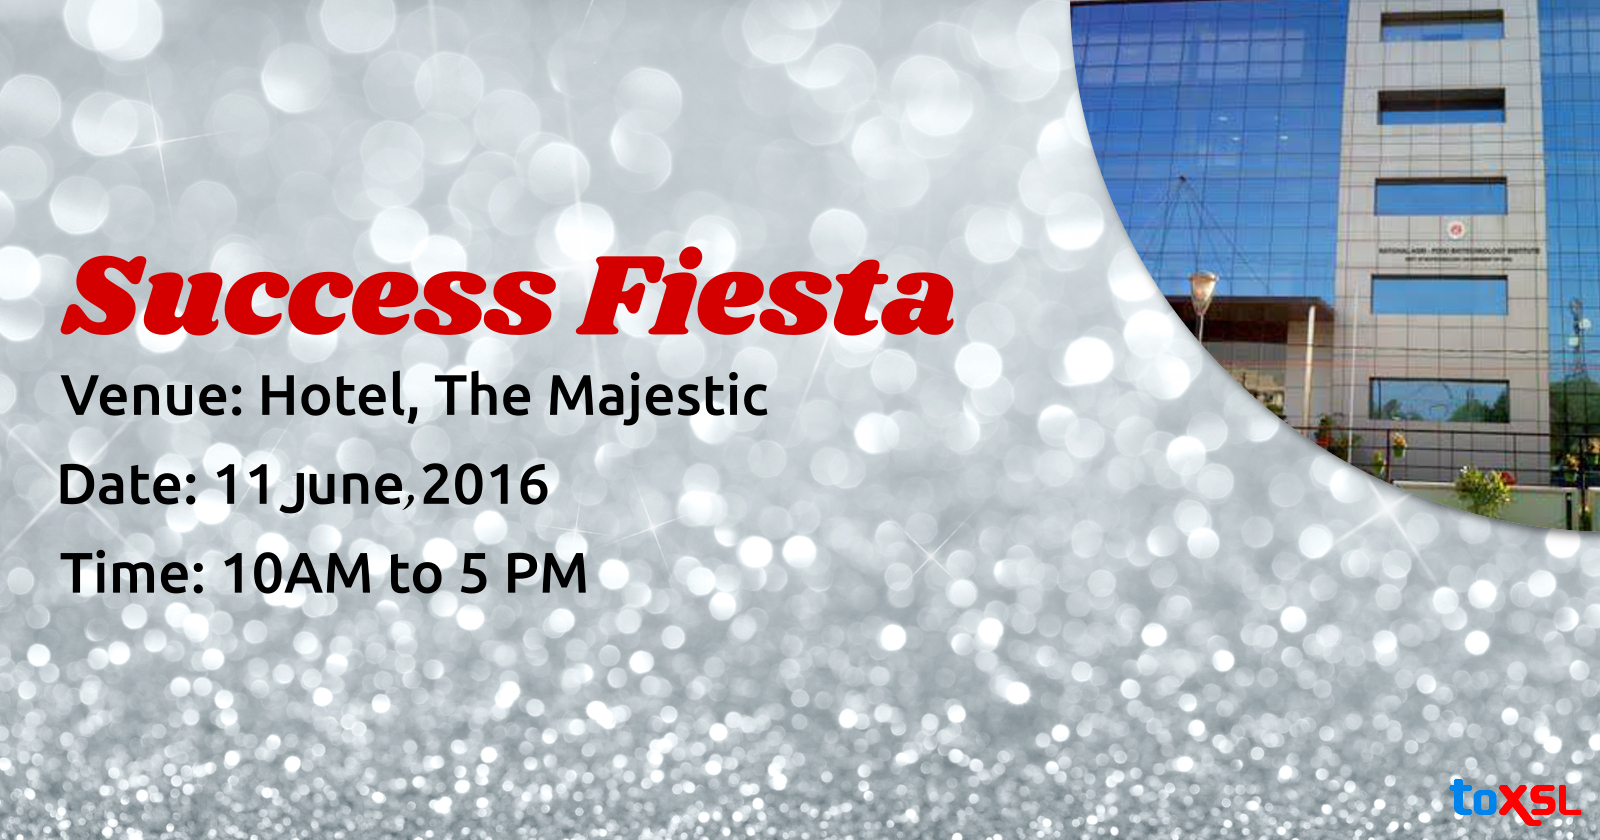 Success Fiesta: Get Ready For the Annual Celebration